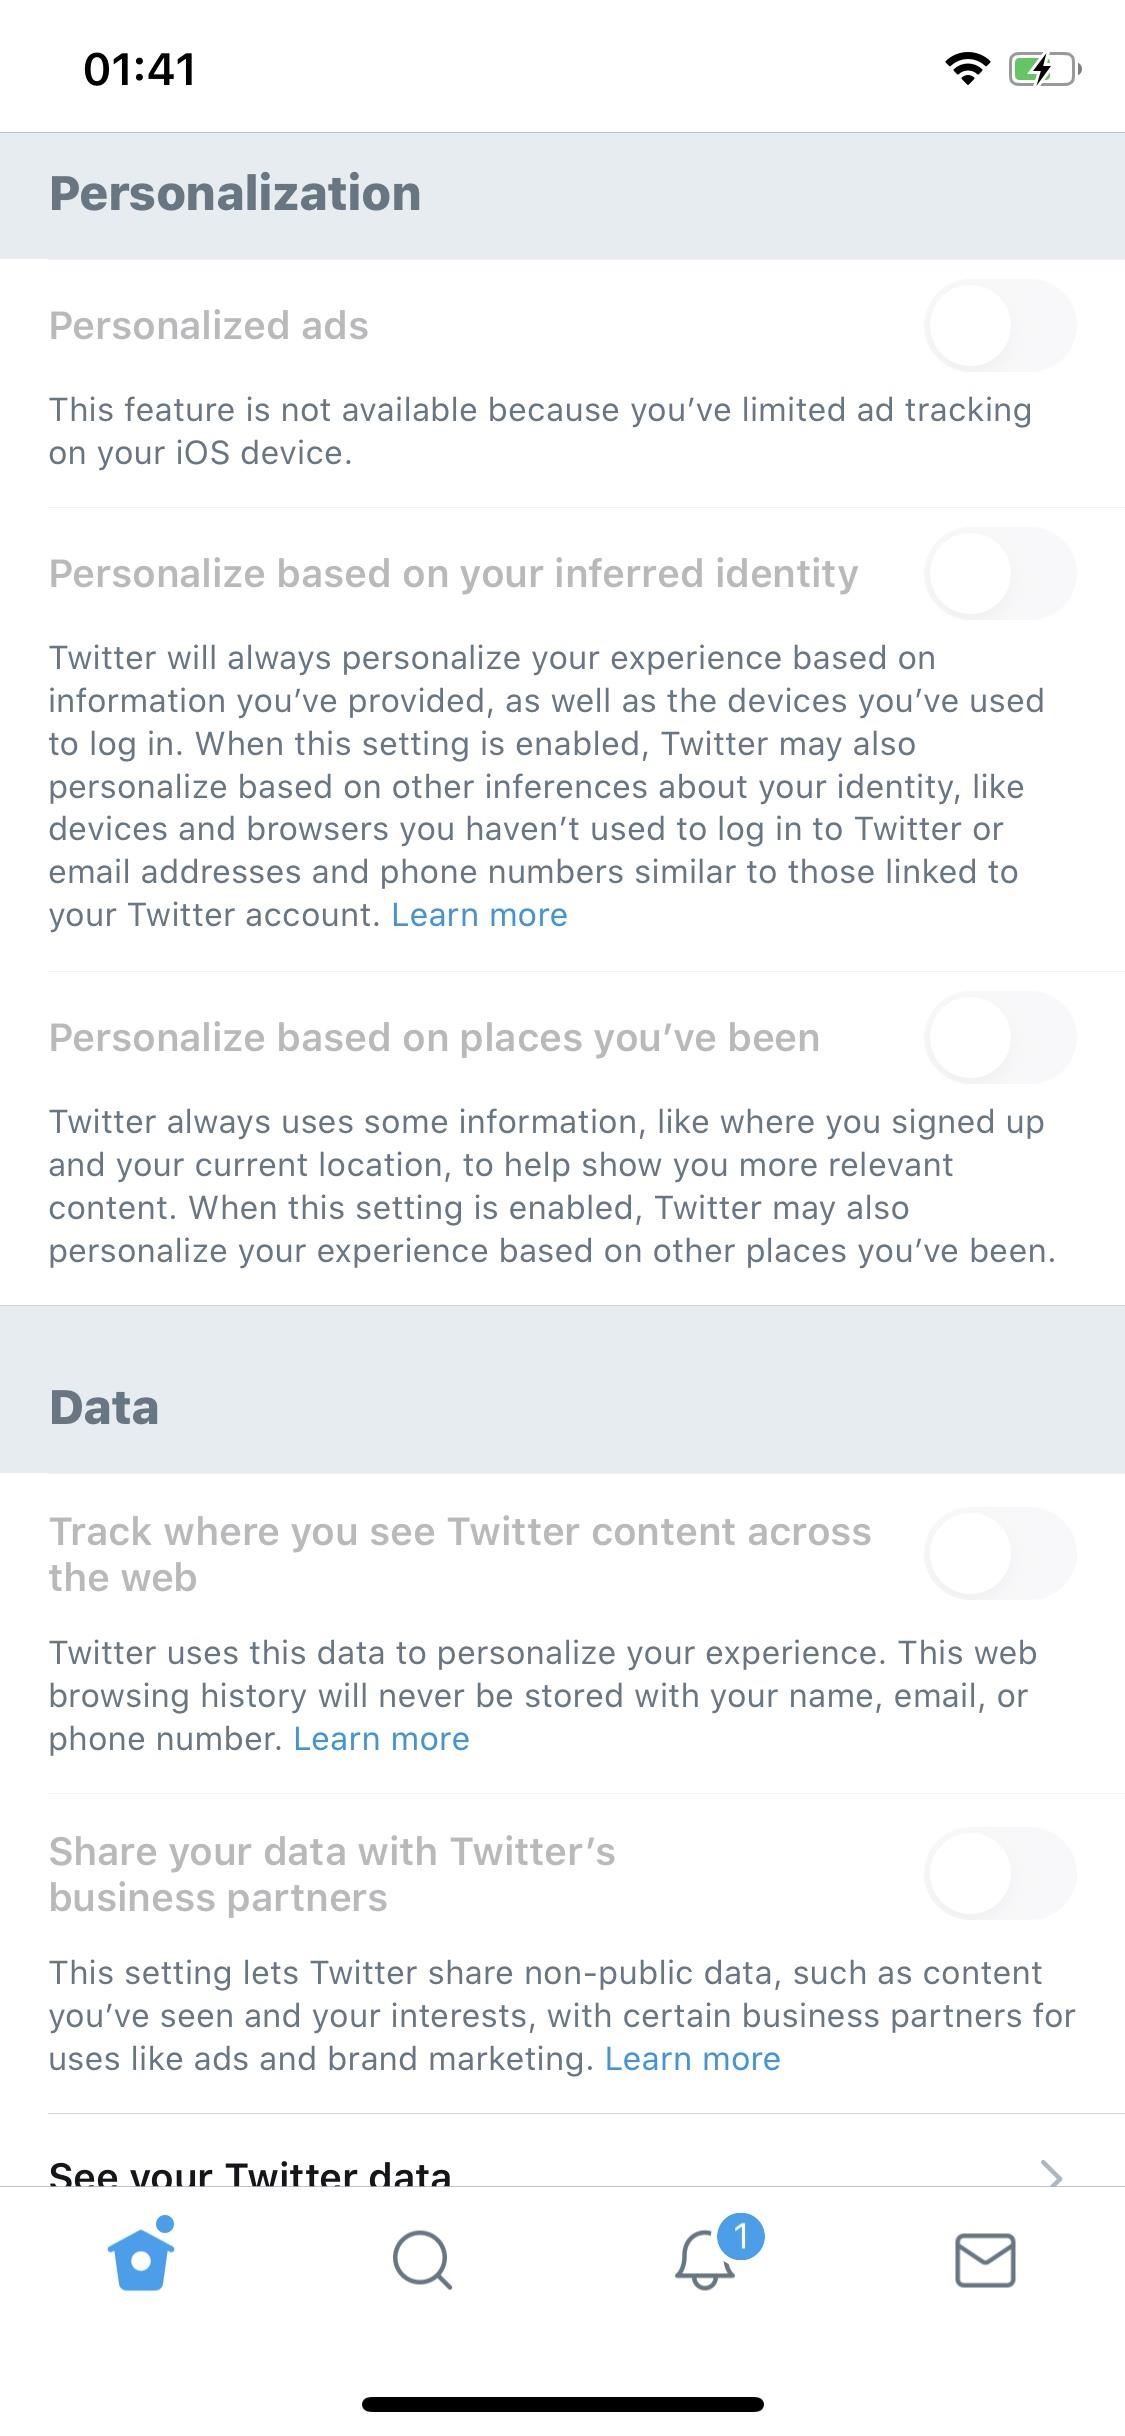 7 Tips to Improve Your Privacy & Safety on Twitter